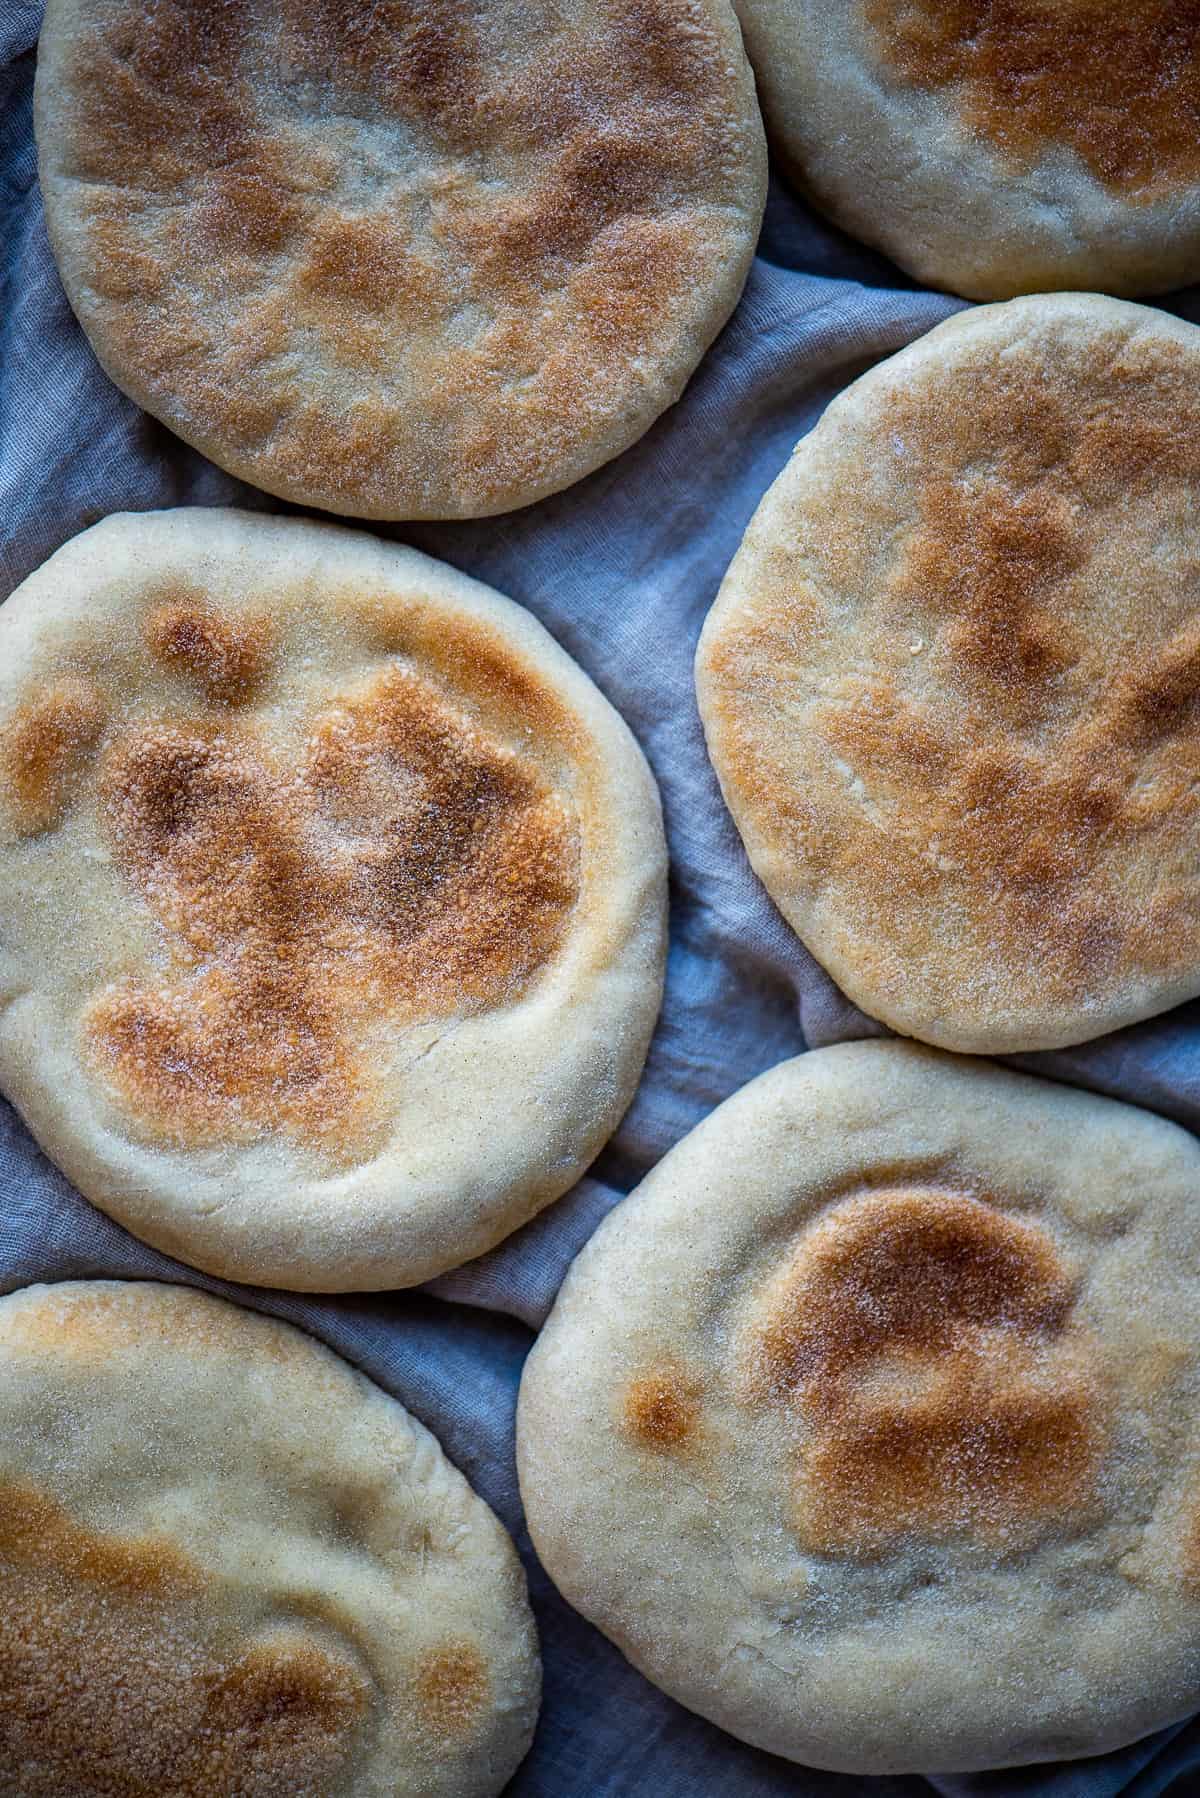 Turkish flat breads with brown spots on their top.